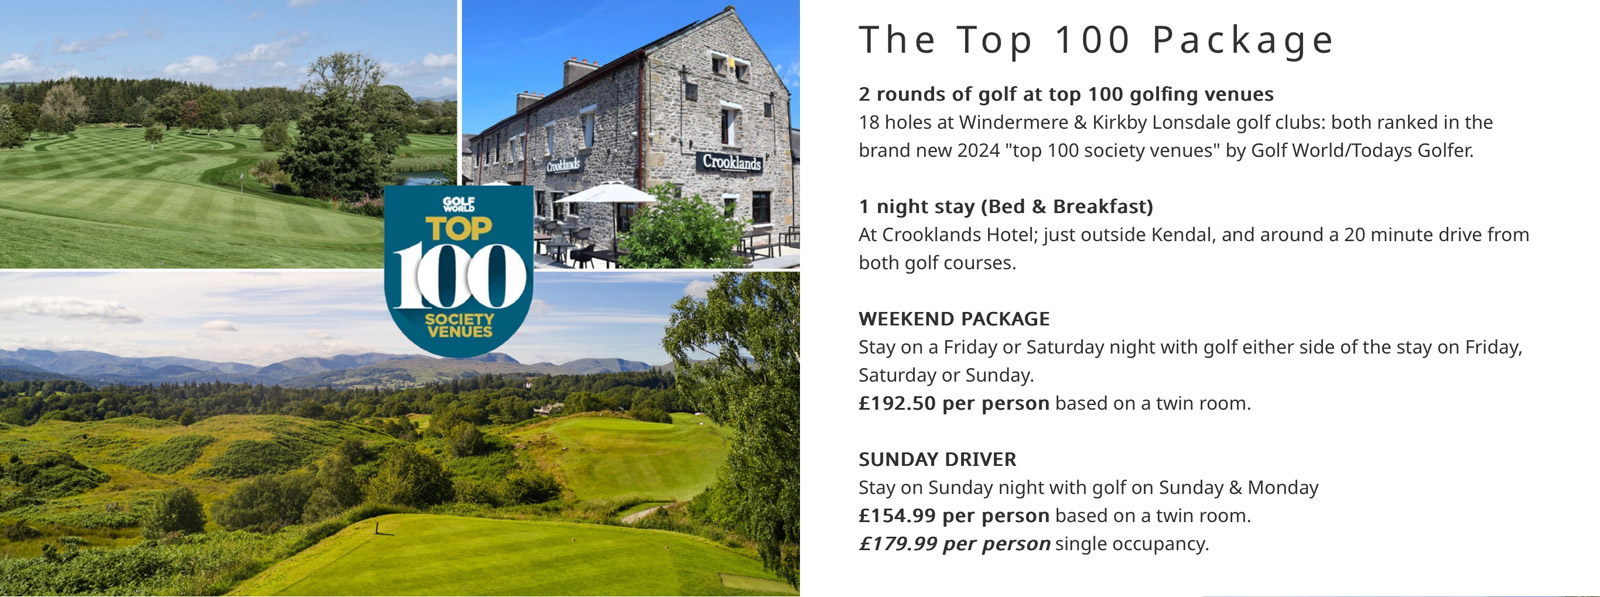 Top 100 Package - Lake District